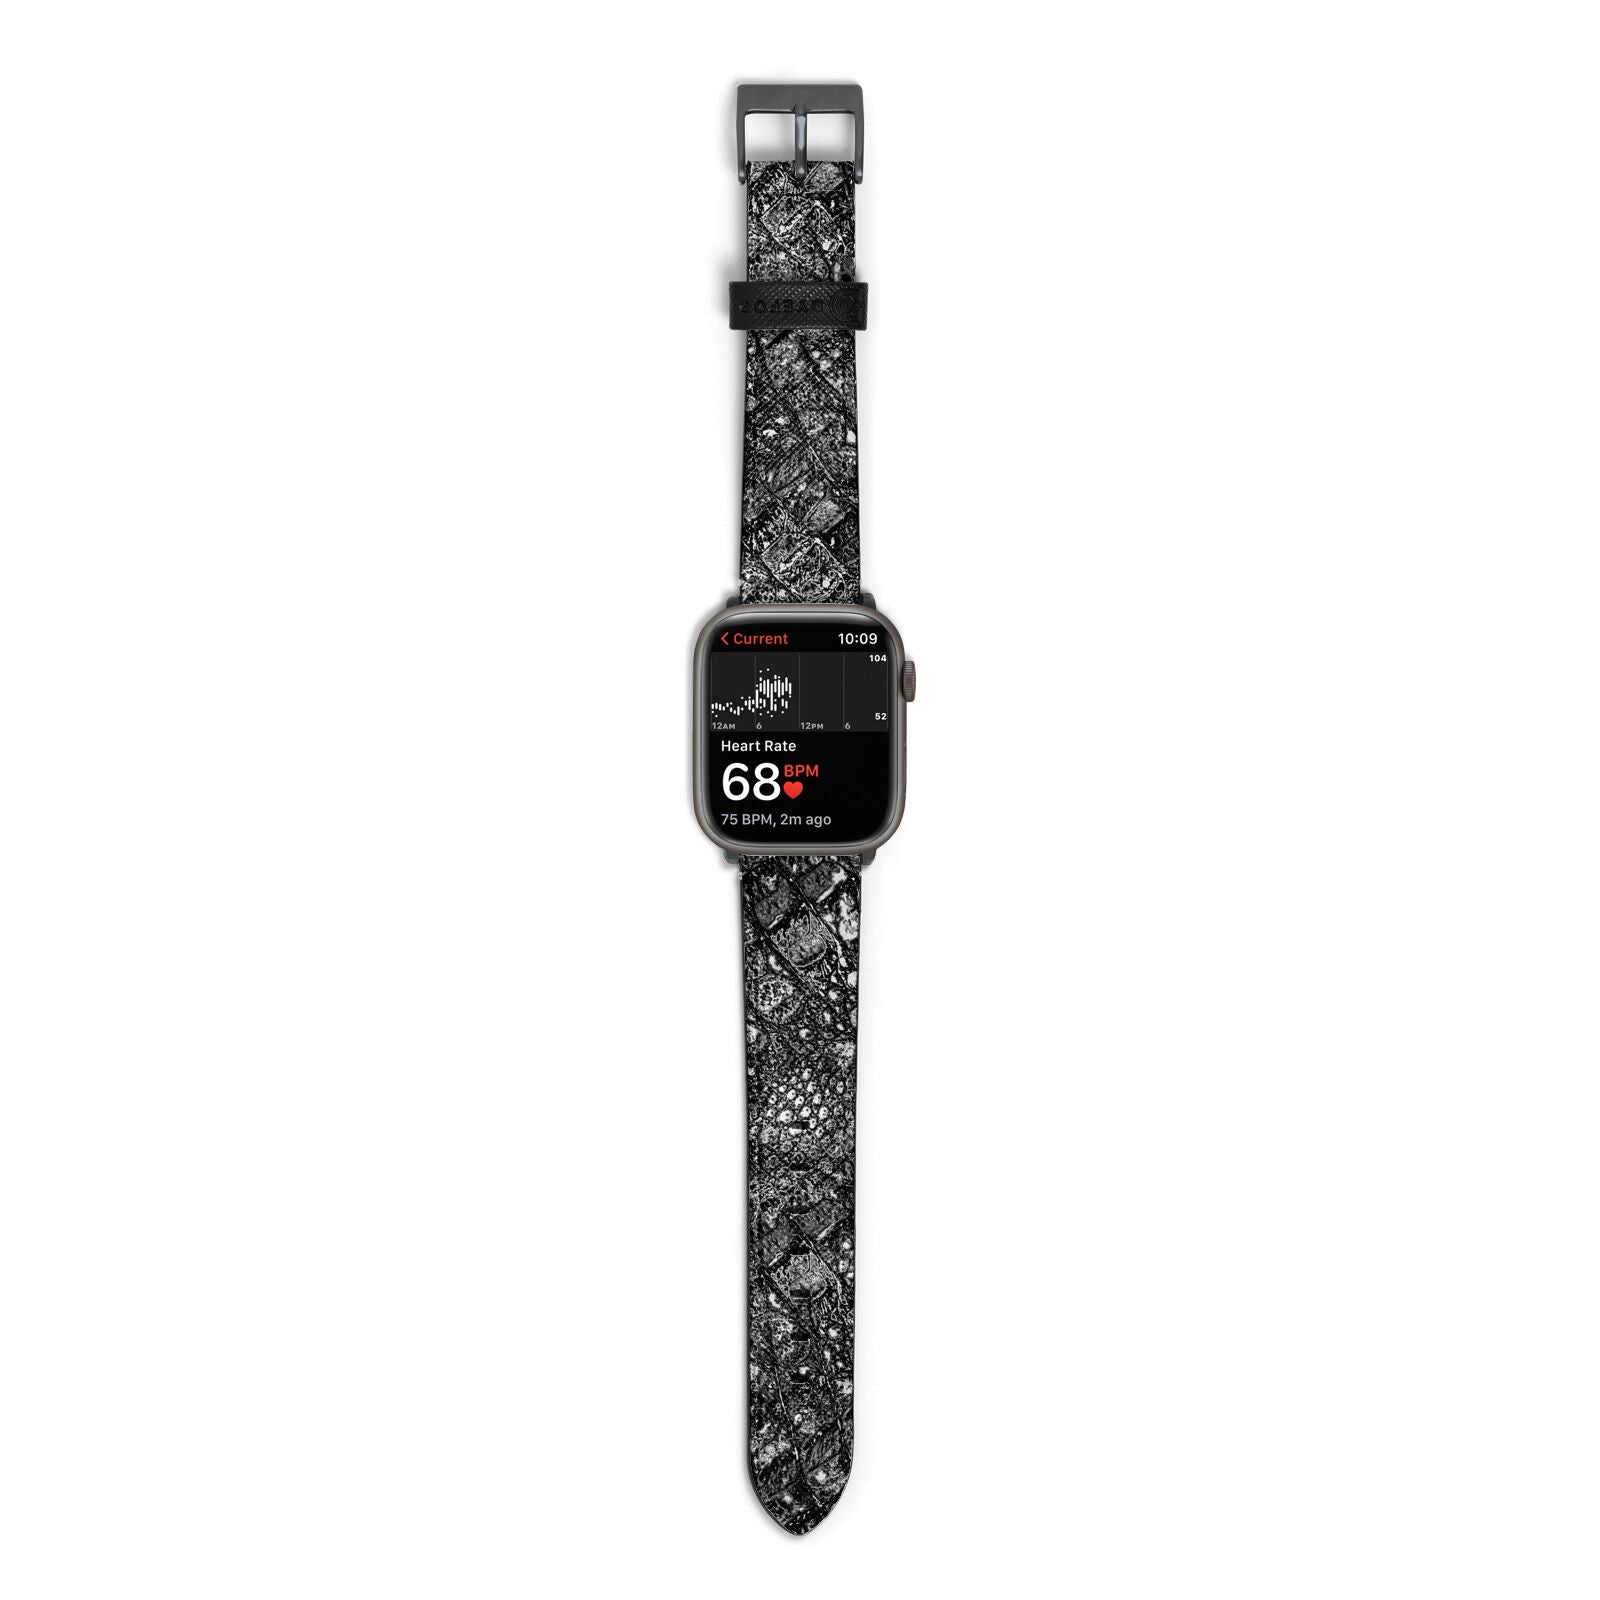 Snakeskin Design Apple Watch Strap Size 38mm with Space Grey Hardware